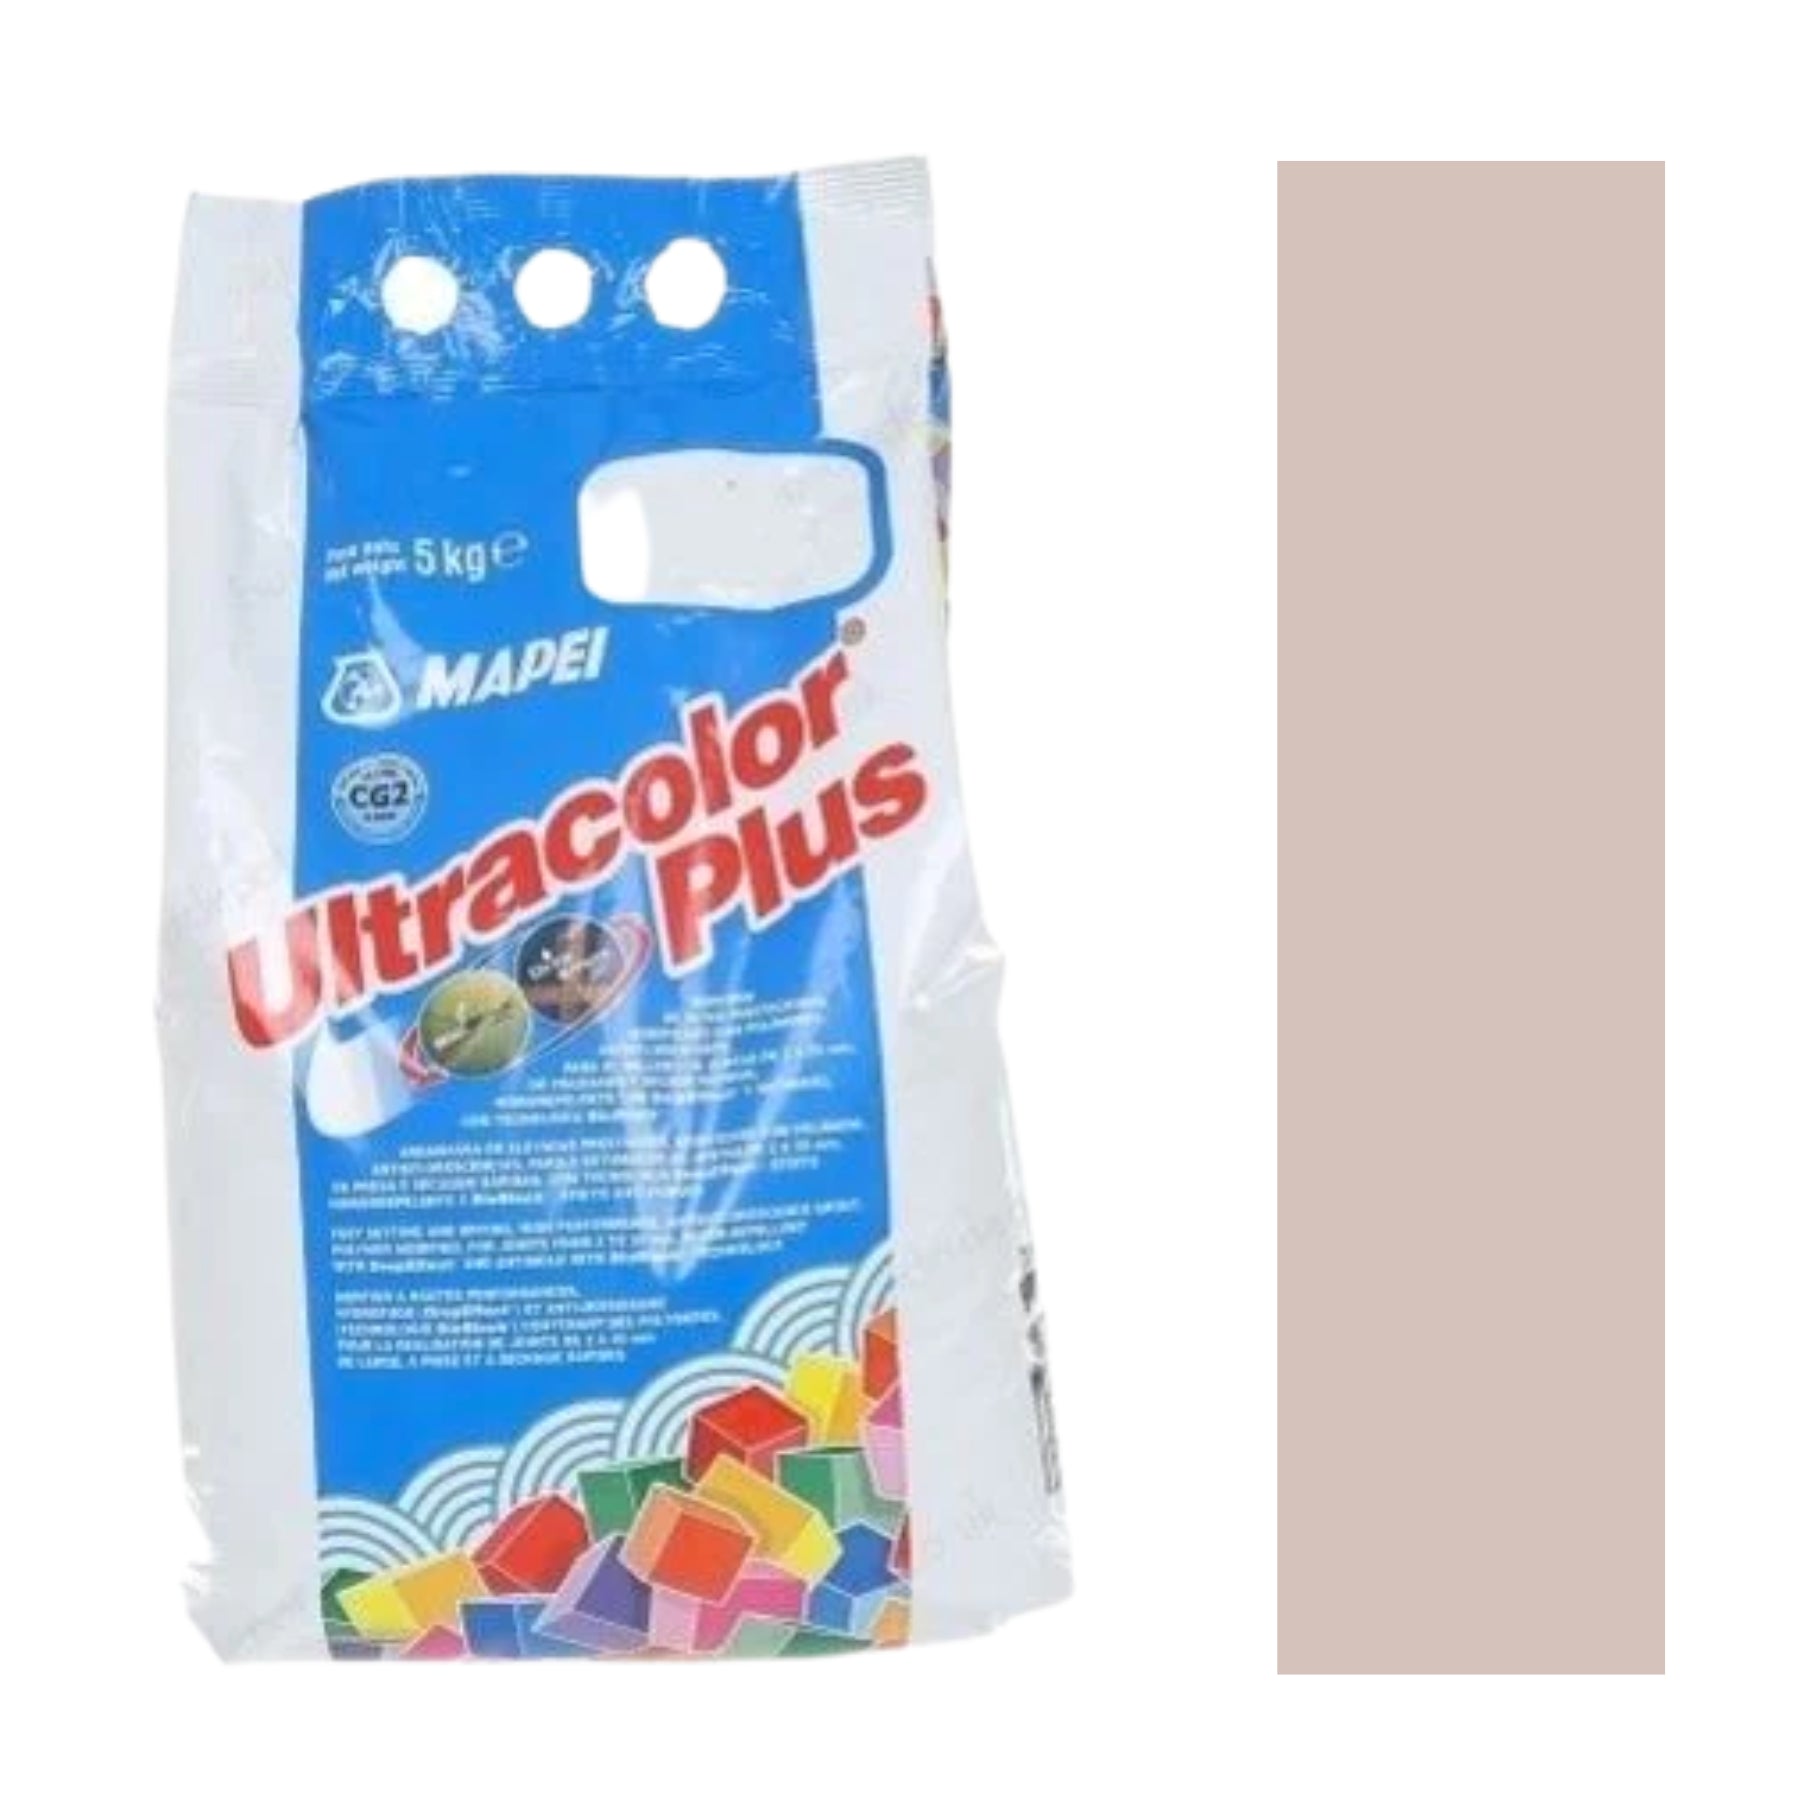 Ultracolor-plus Grout - 123 Ancient White